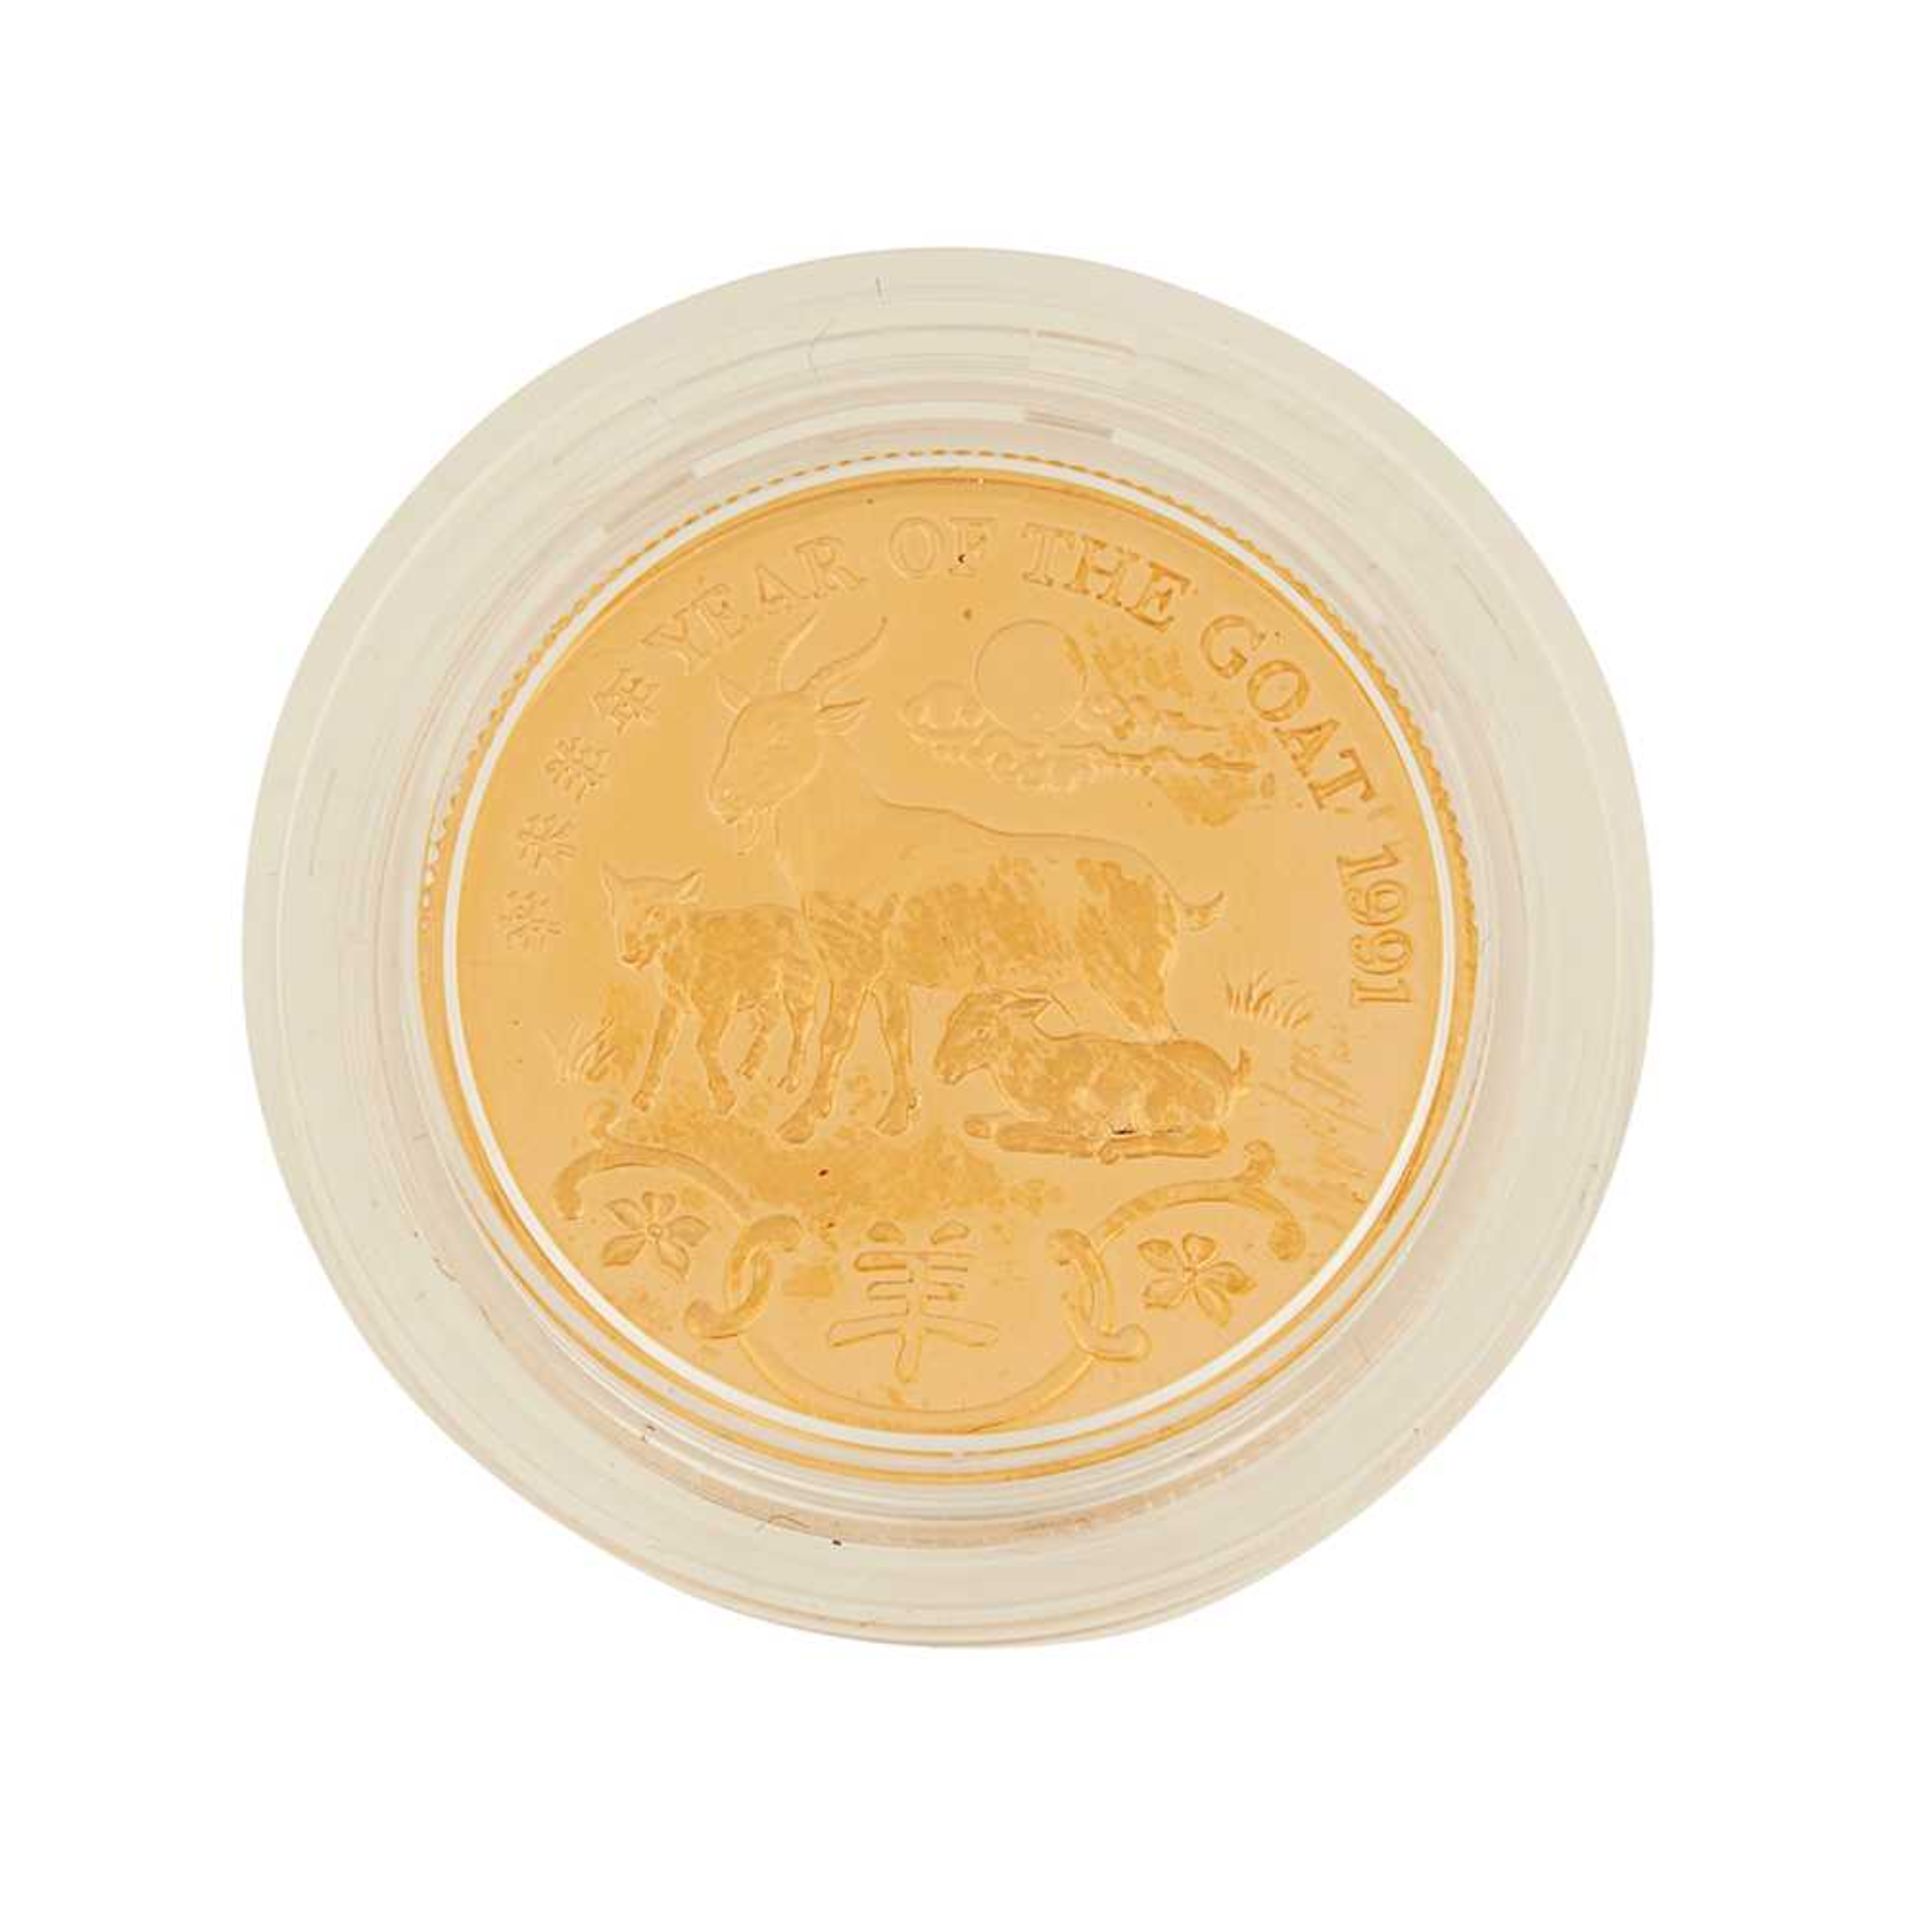 Hong Kong – A year of the Goat, 1991 proof gold medal